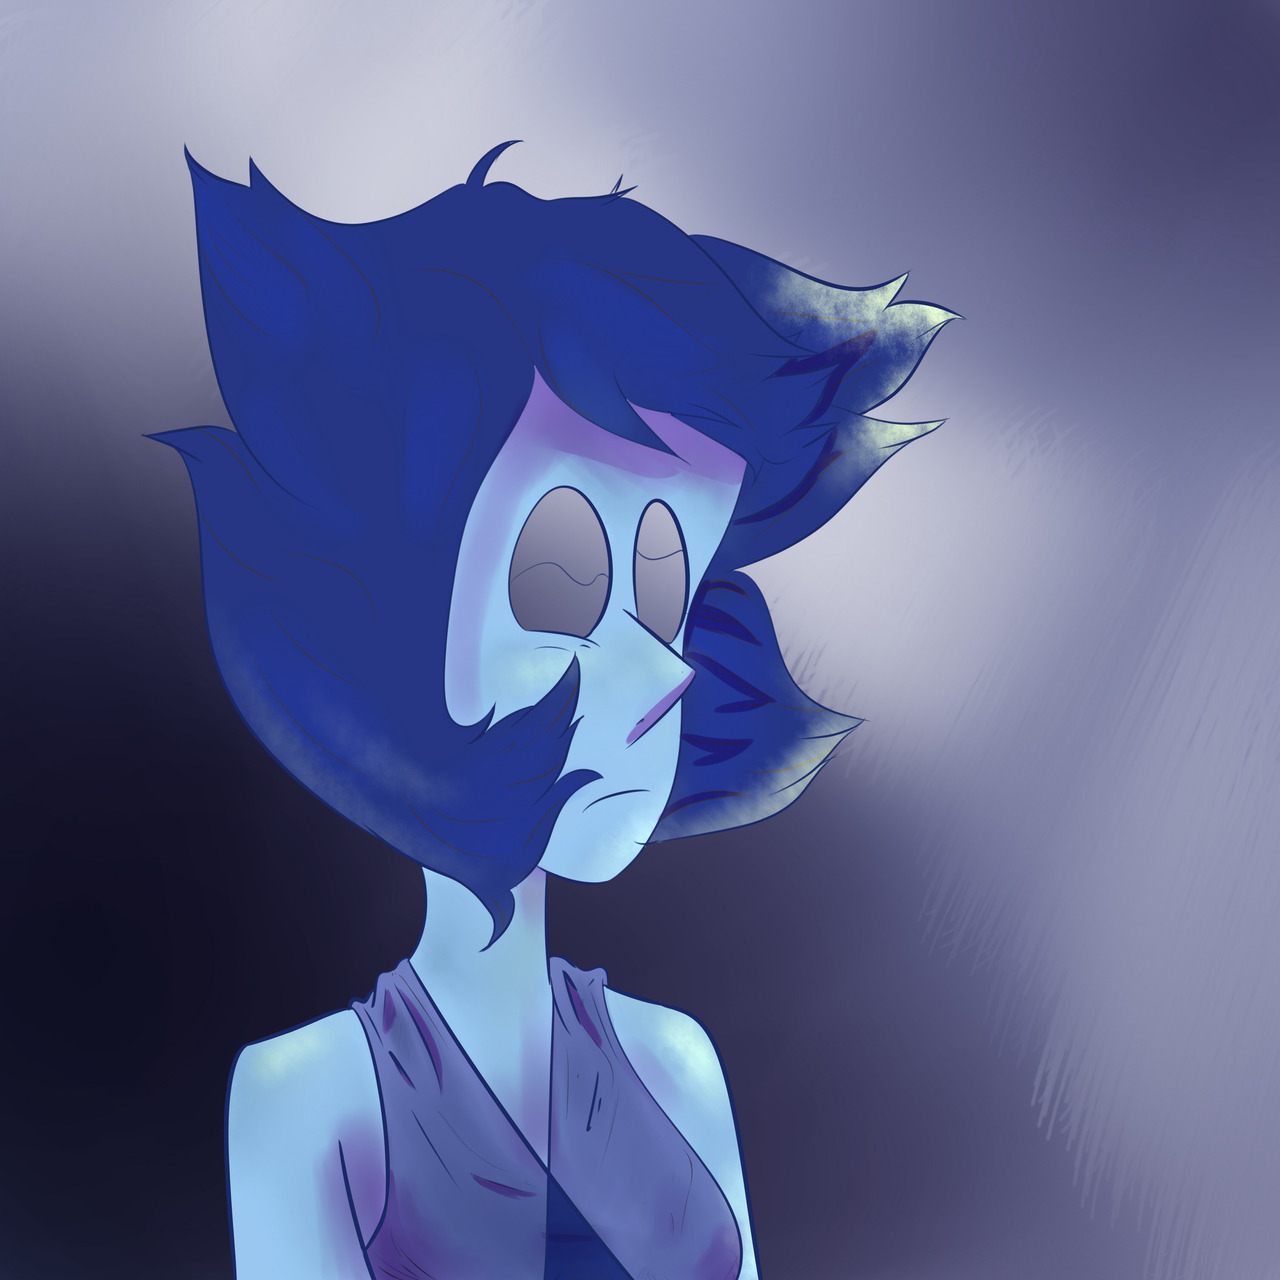 Hey here is another Lapis… mirror eye gem. Trying to get out a bit more art so myeh… Follow if you’d like to see more I guess